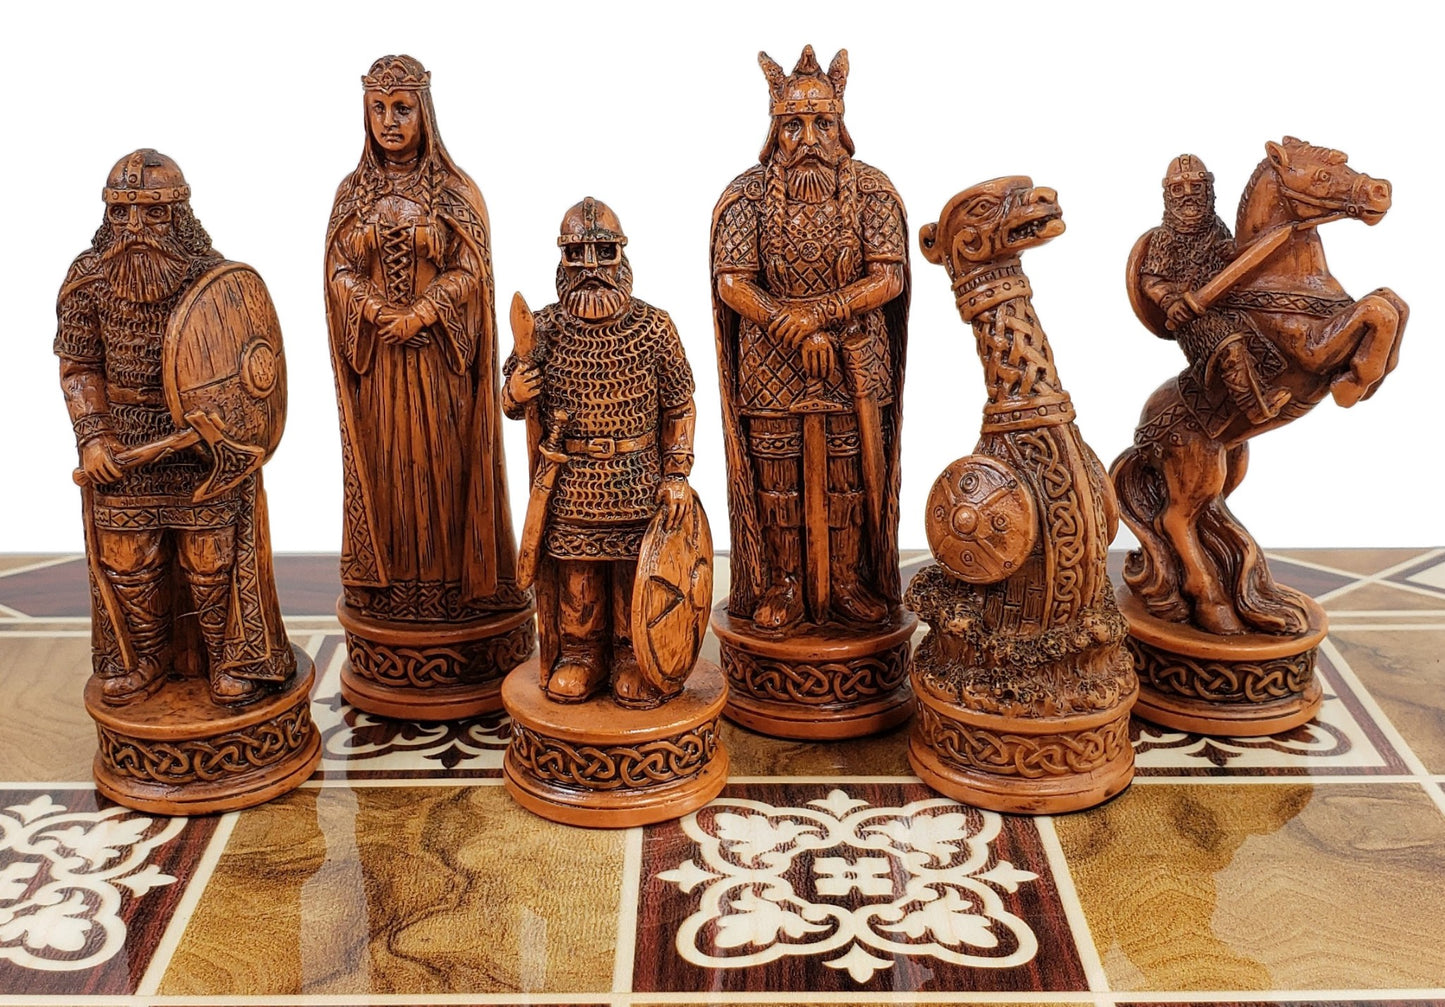 Antique White & Brown Norse Viking Chess Set 3 1/4 King 17" Burlwood Color Board